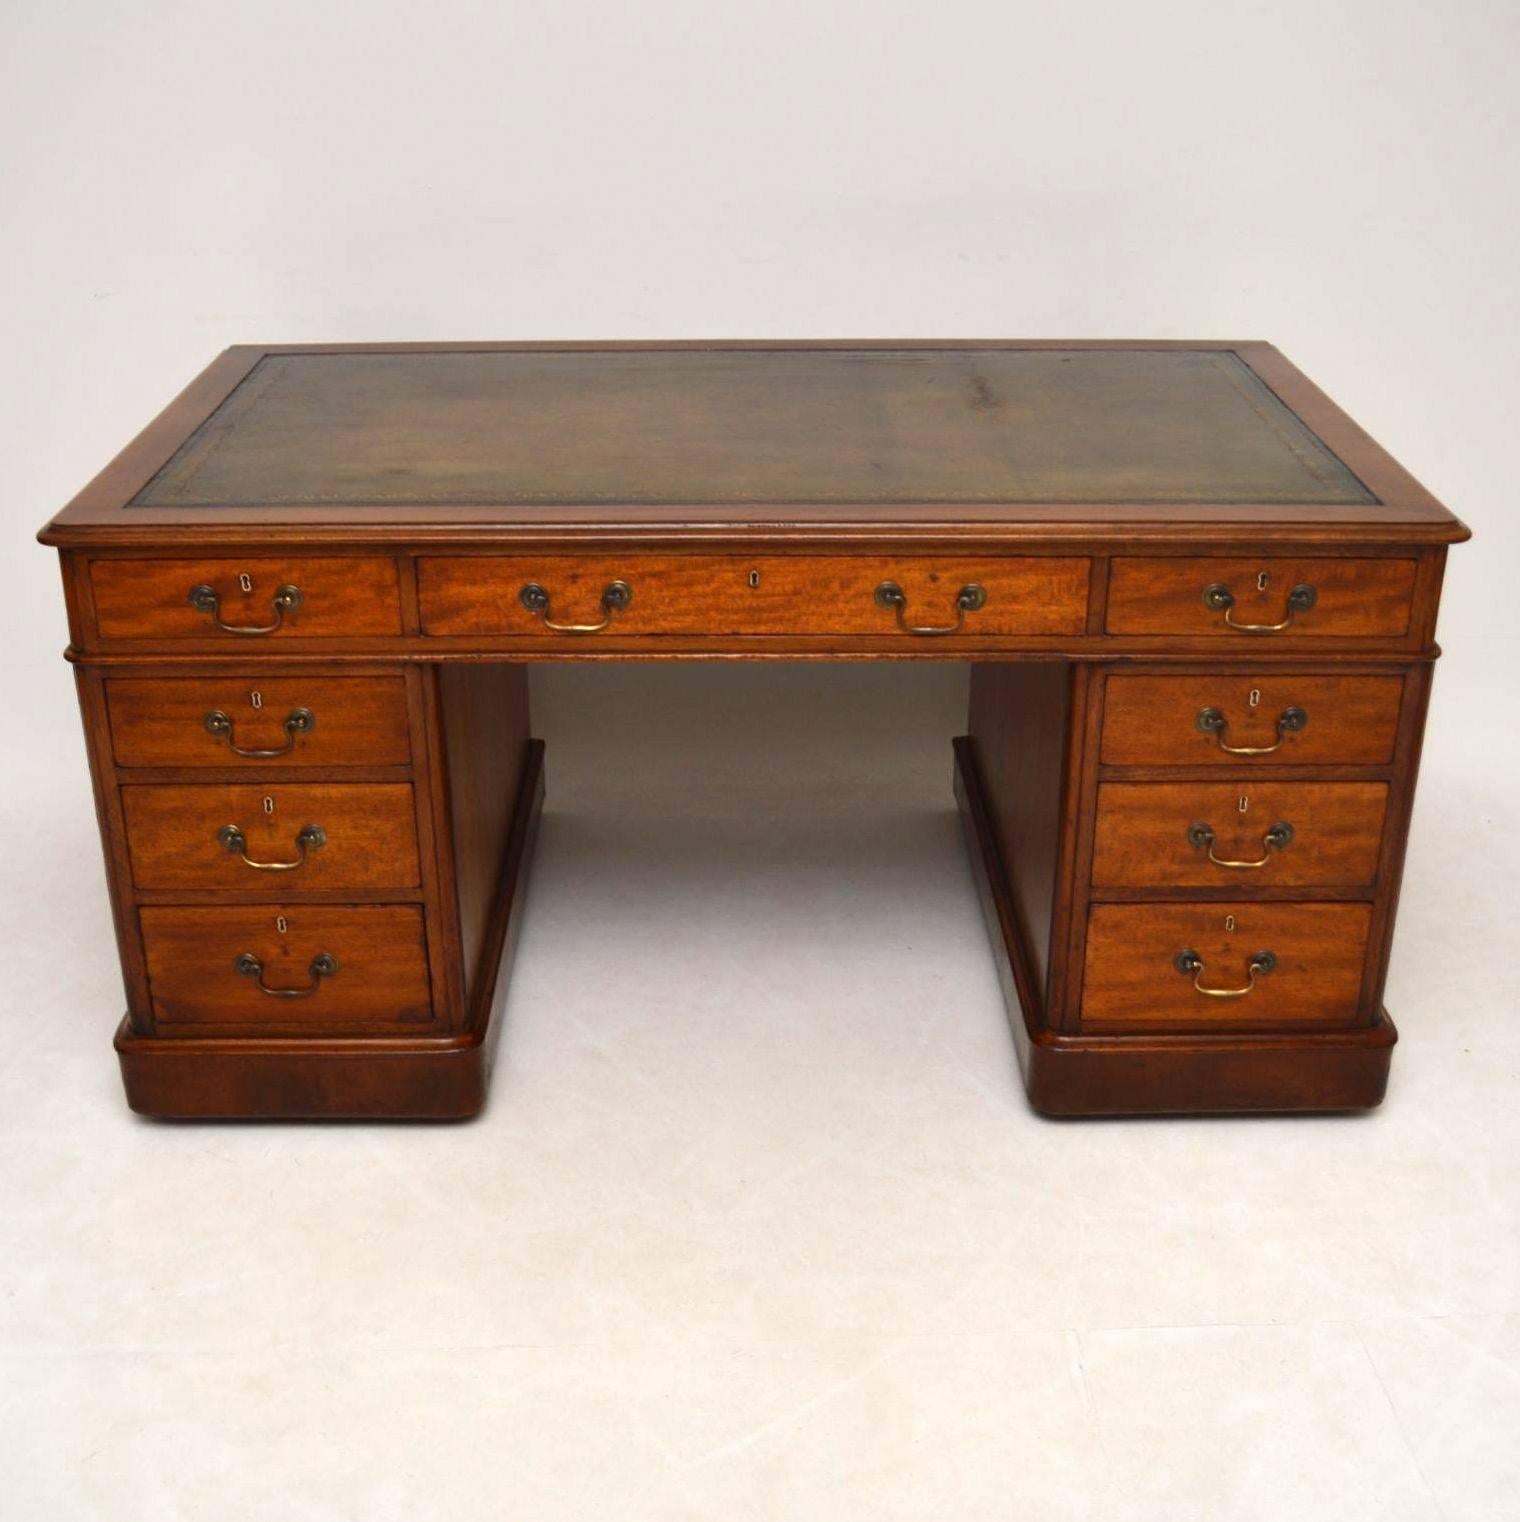 Large Victorian mahogany pedestal desk with a tooled leather writing surface and a generously wide kneehole area. It has rounded corners, graduated drawers with antique brass handles, polished panelled backs and sits on plinth bases with concealed